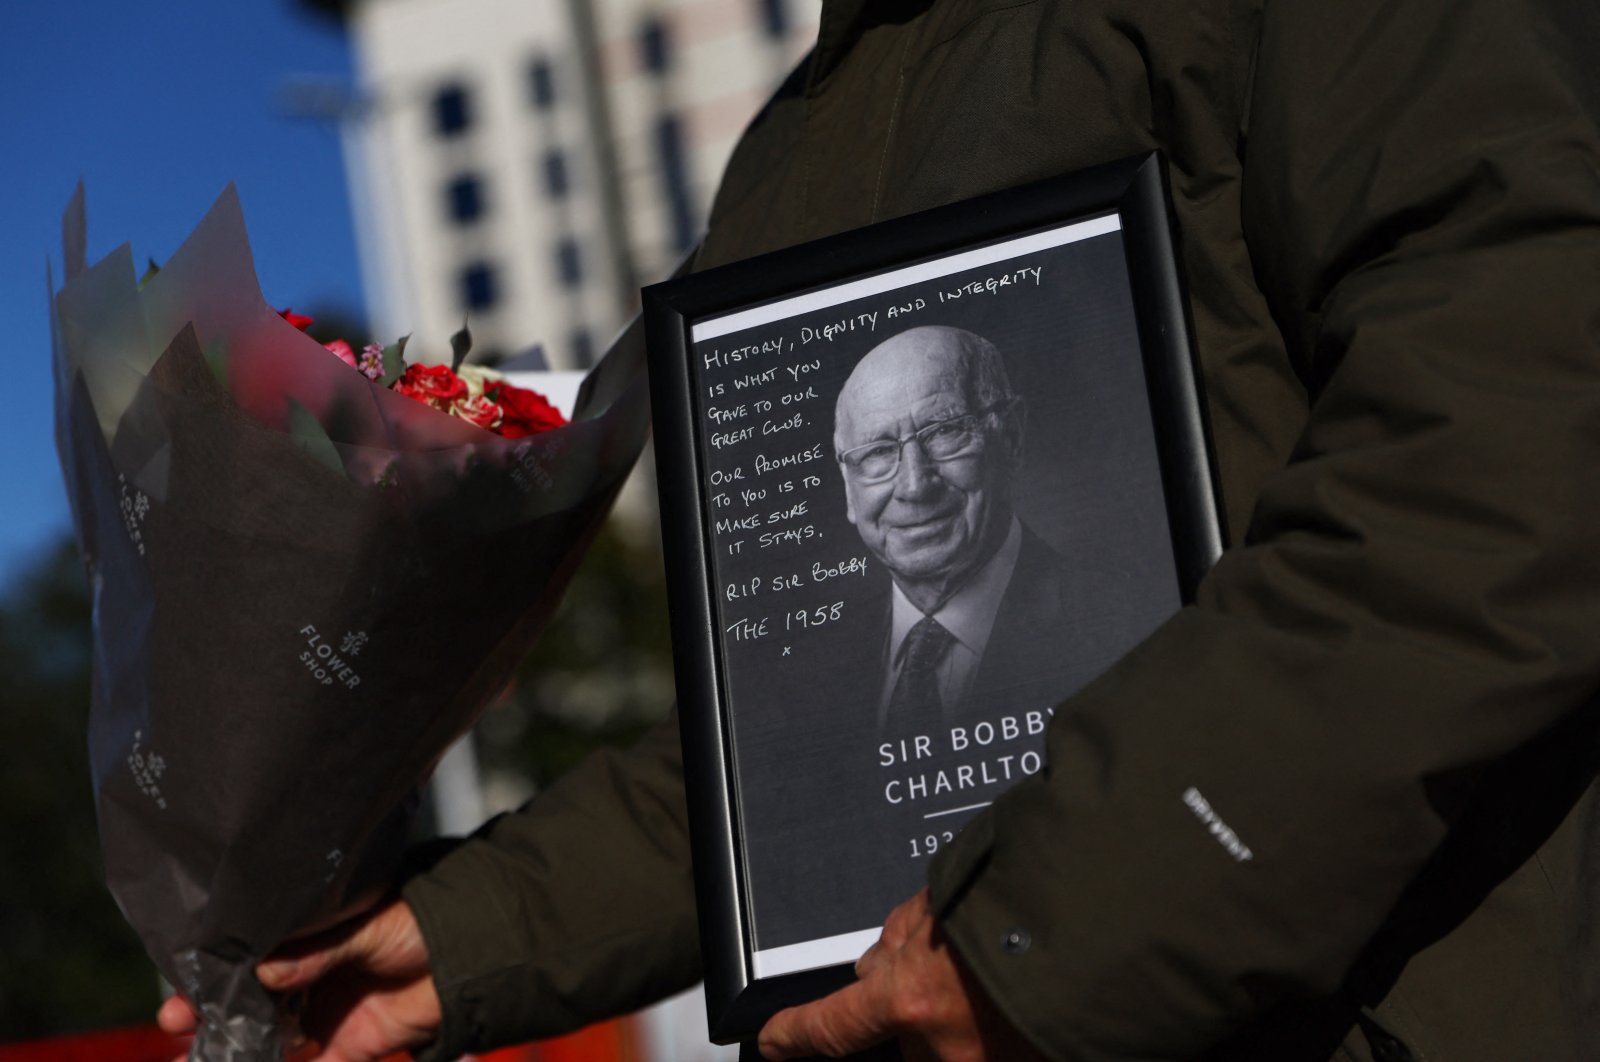 A fan is seen with a framed Bobby Charlton picture and flowers outside Old Trafford, Manchester, U.K., Oct. 22, 2023. (Reuters Photo)